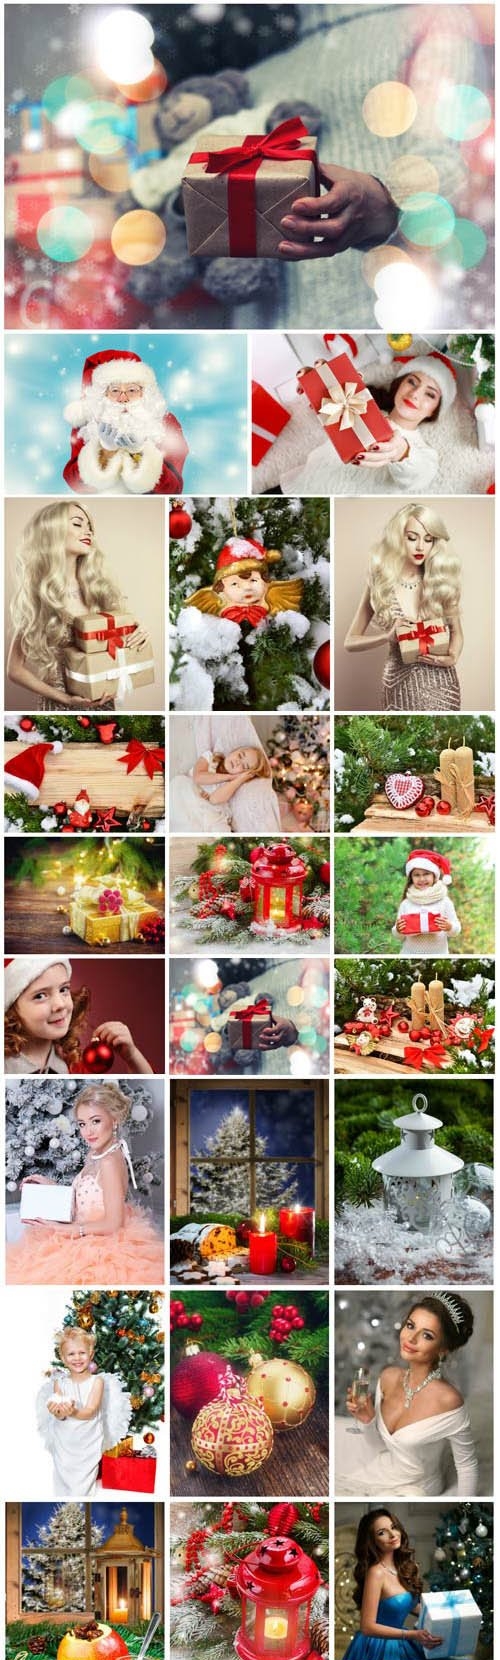 New Year and Christmas stock photos - 76